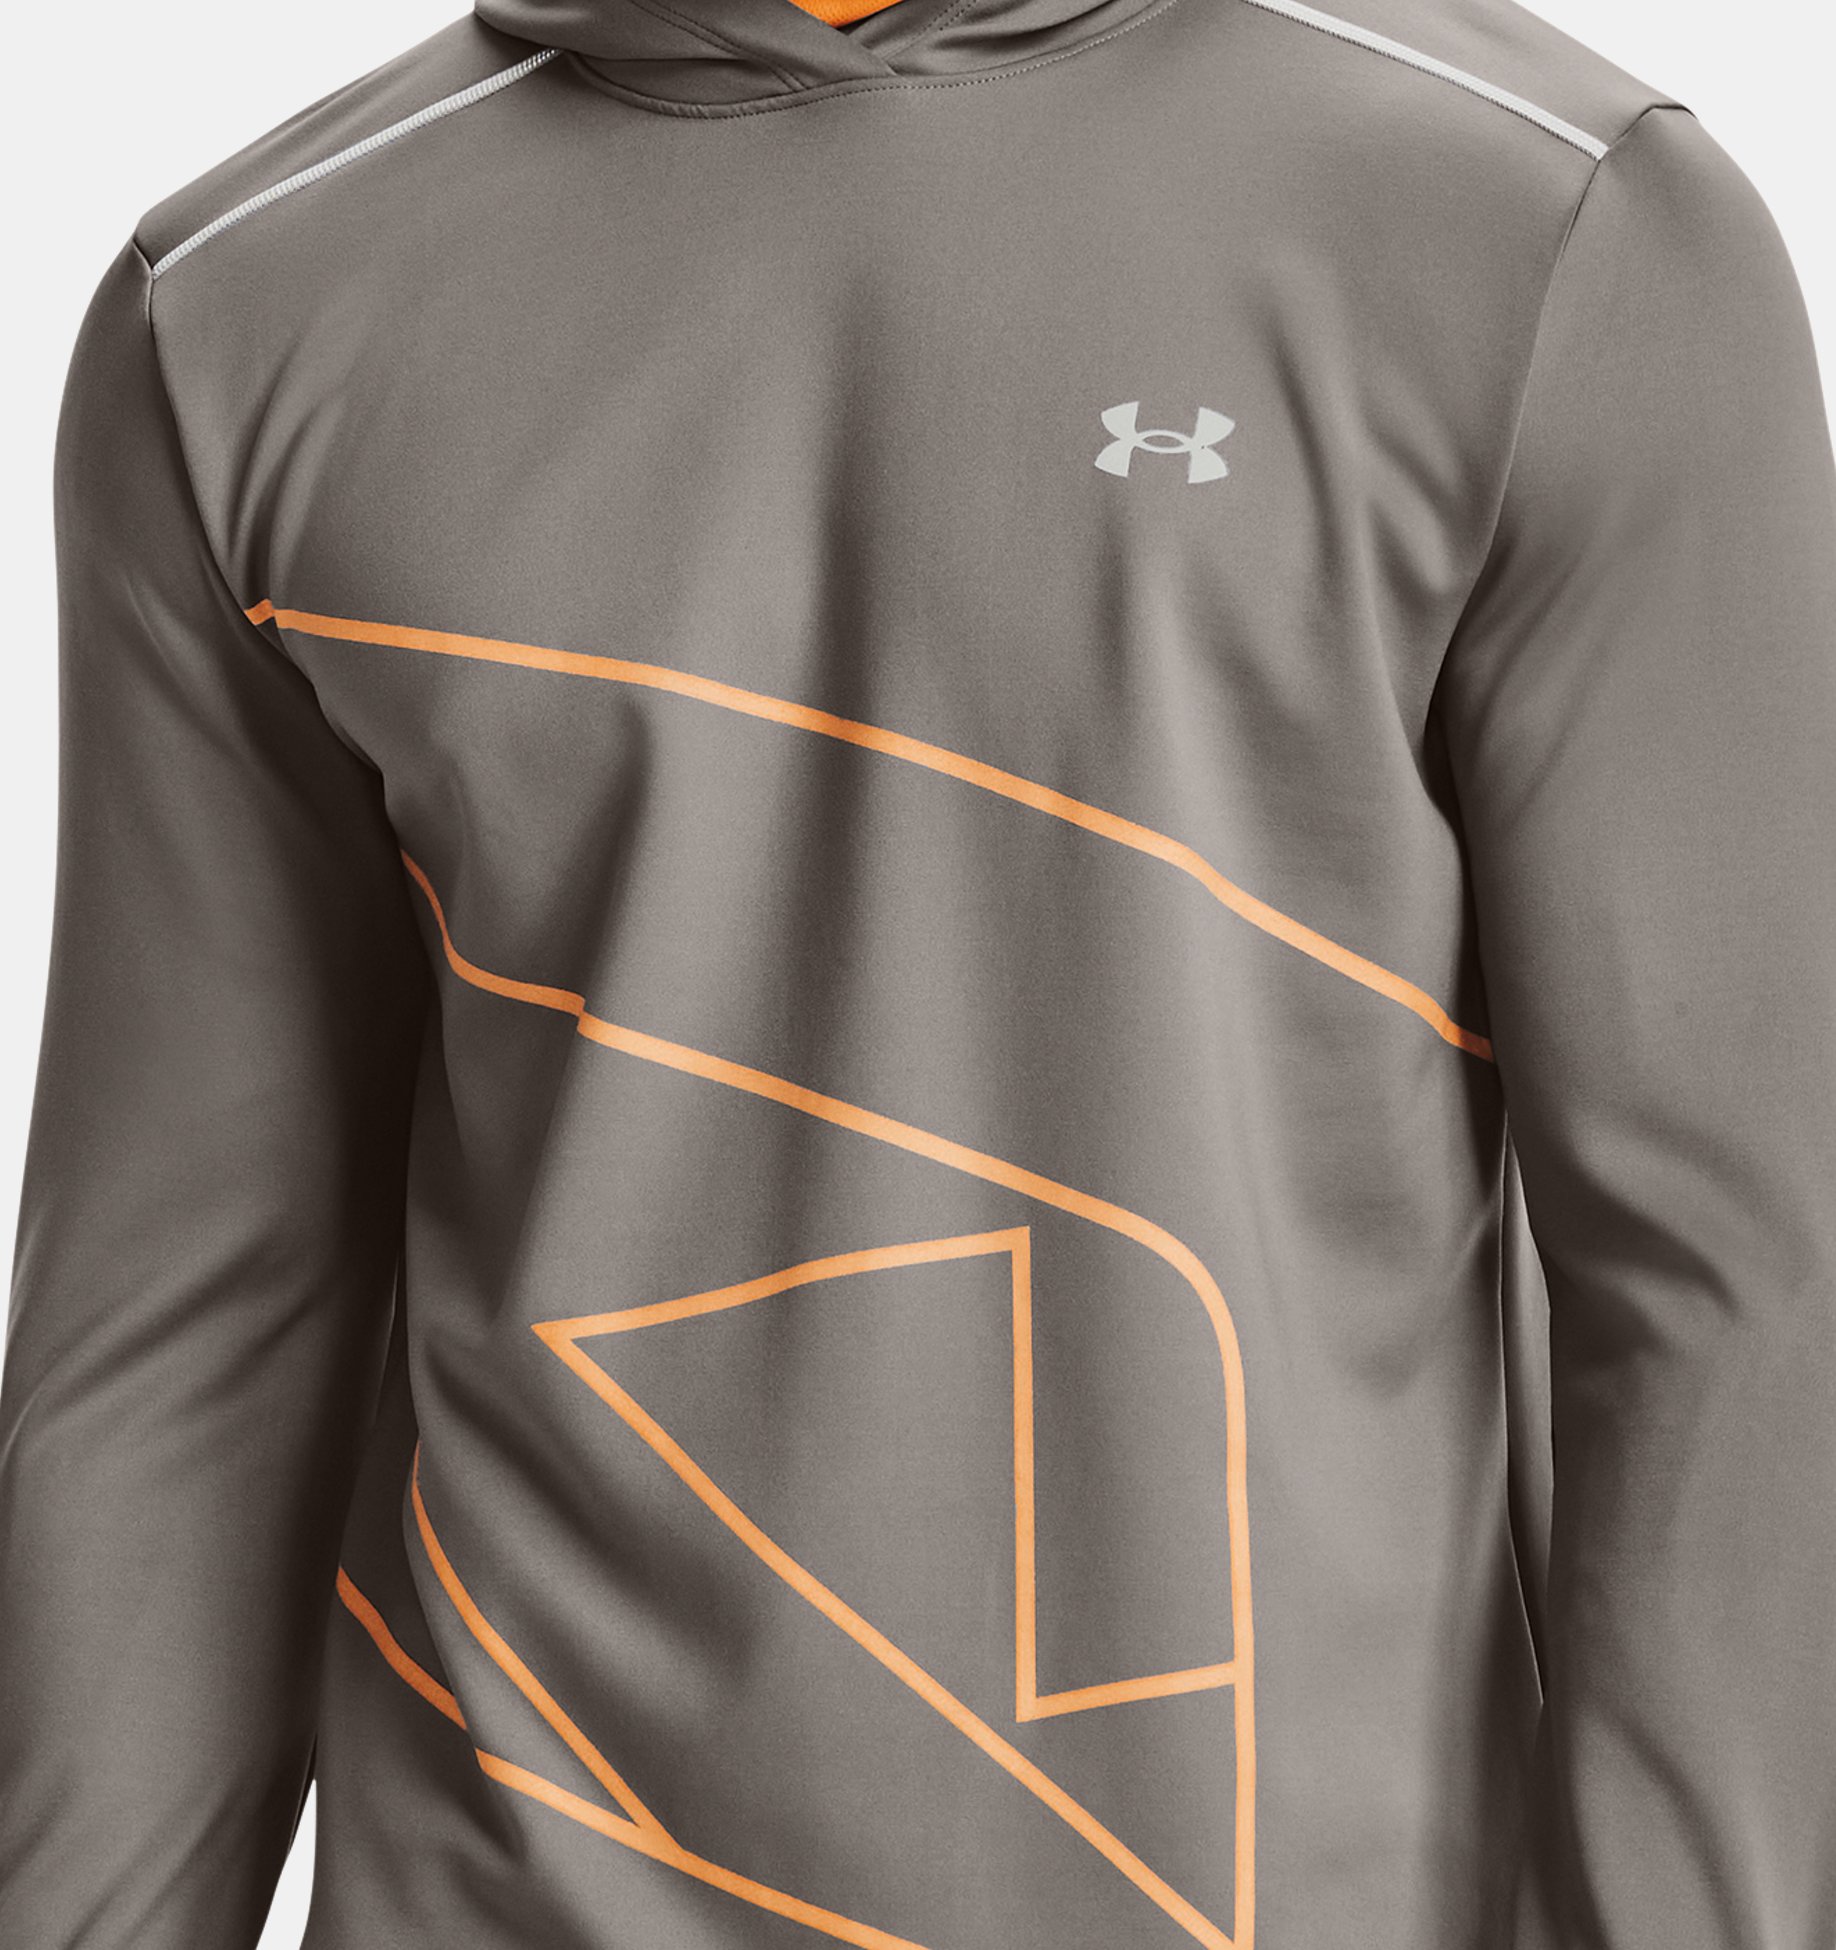 https://underarmour.scene7.com/is/image/Underarmour/V5-1365672-066_FC?rp=standard-0pad|pdpZoomDesktop&scl=0.72&fmt=jpg&qlt=85&resMode=sharp2&cache=on,on&bgc=f0f0f0&wid=1836&hei=1950&size=1500,1500